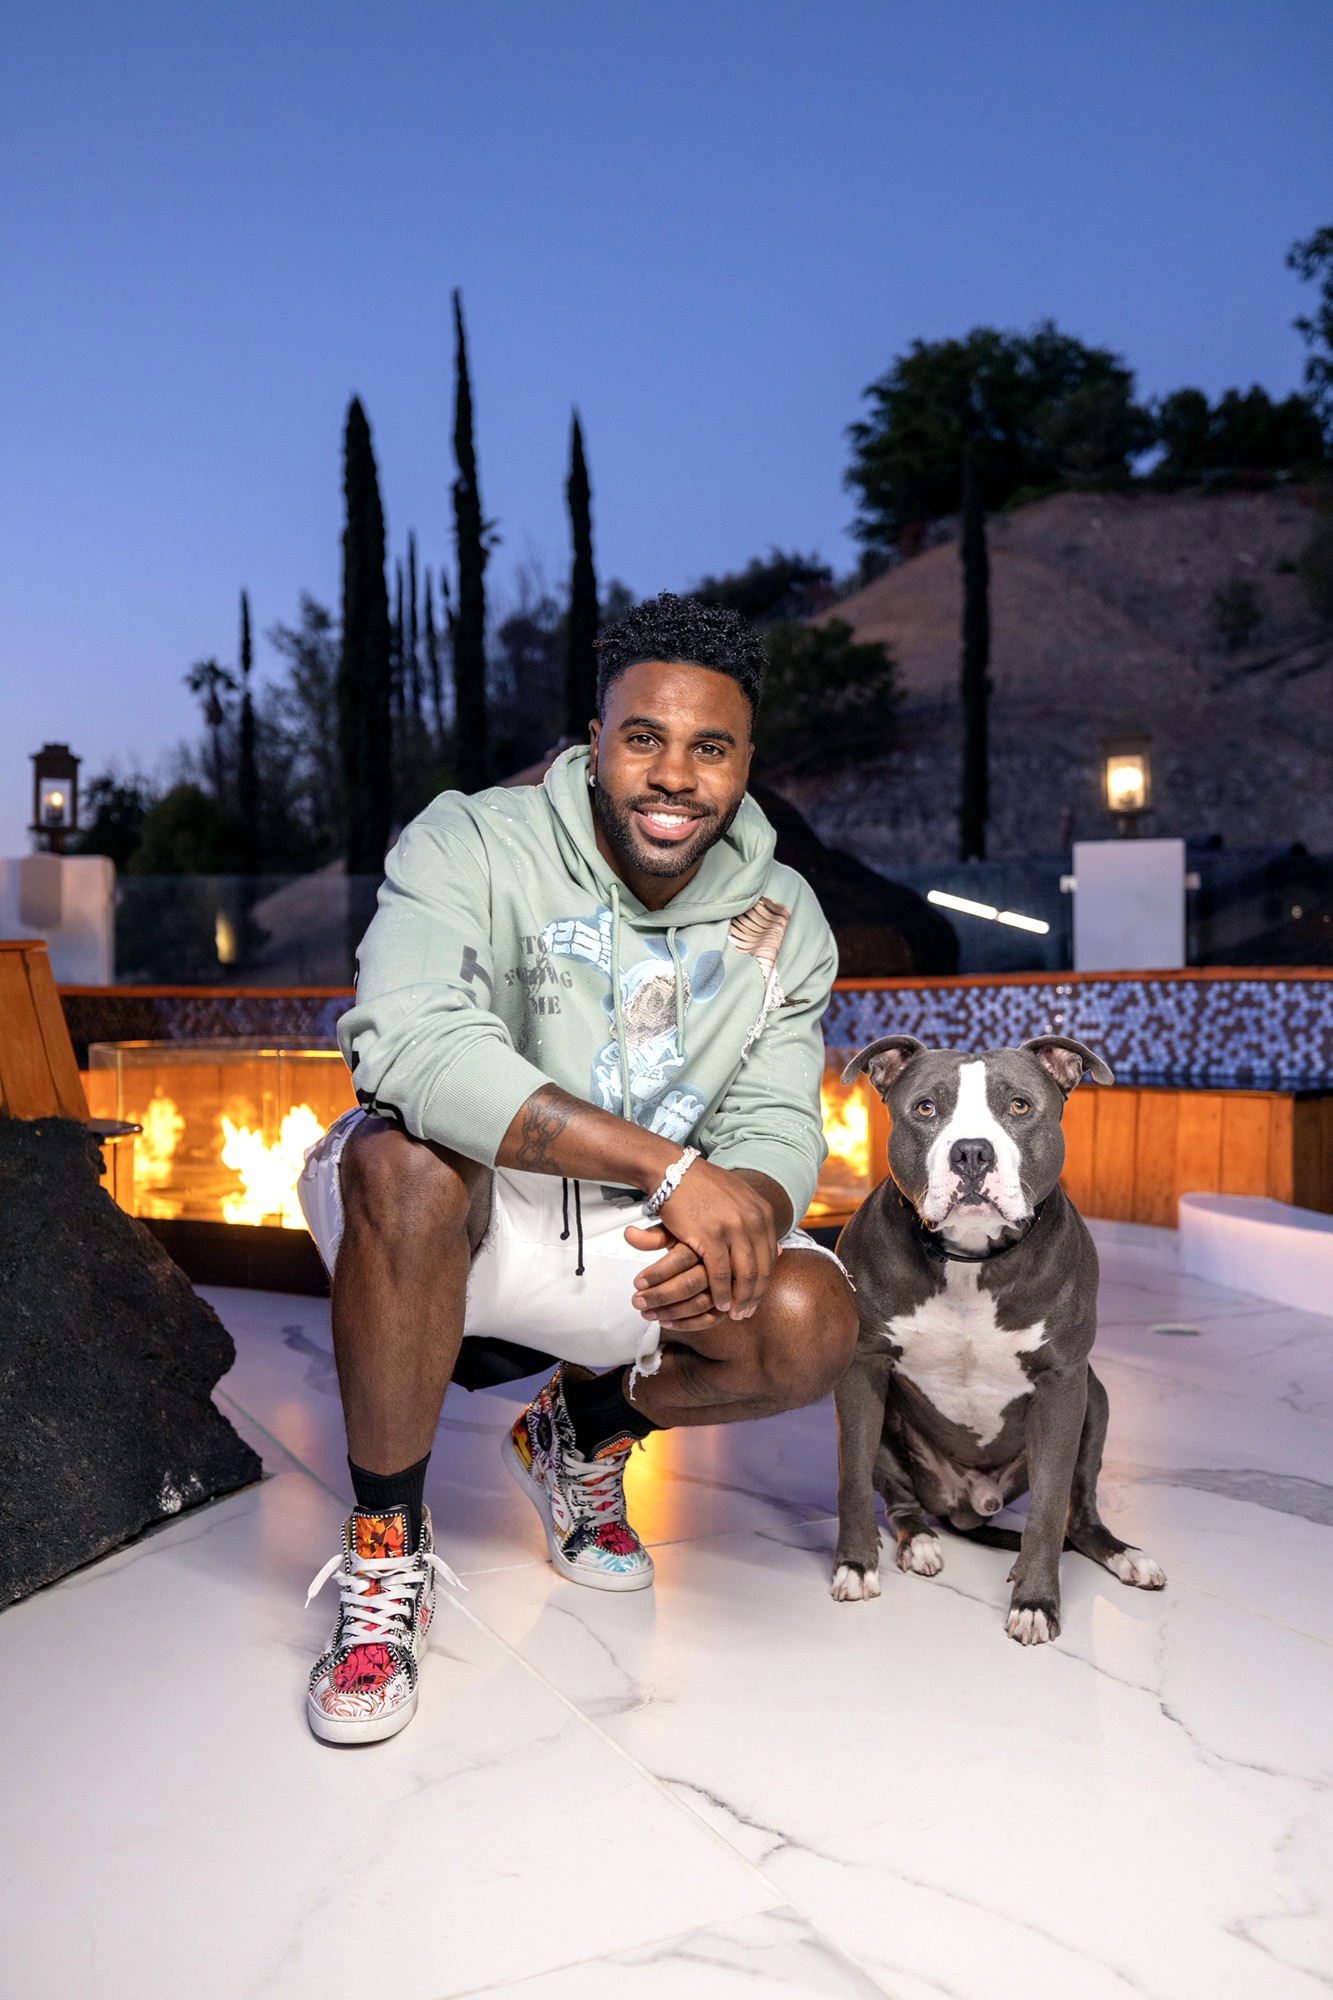 Jason Derulo and his canine companion, Ice, in front of his outdoor firepit with flooring made of white & gray vein porcelain slab that looks like marble.